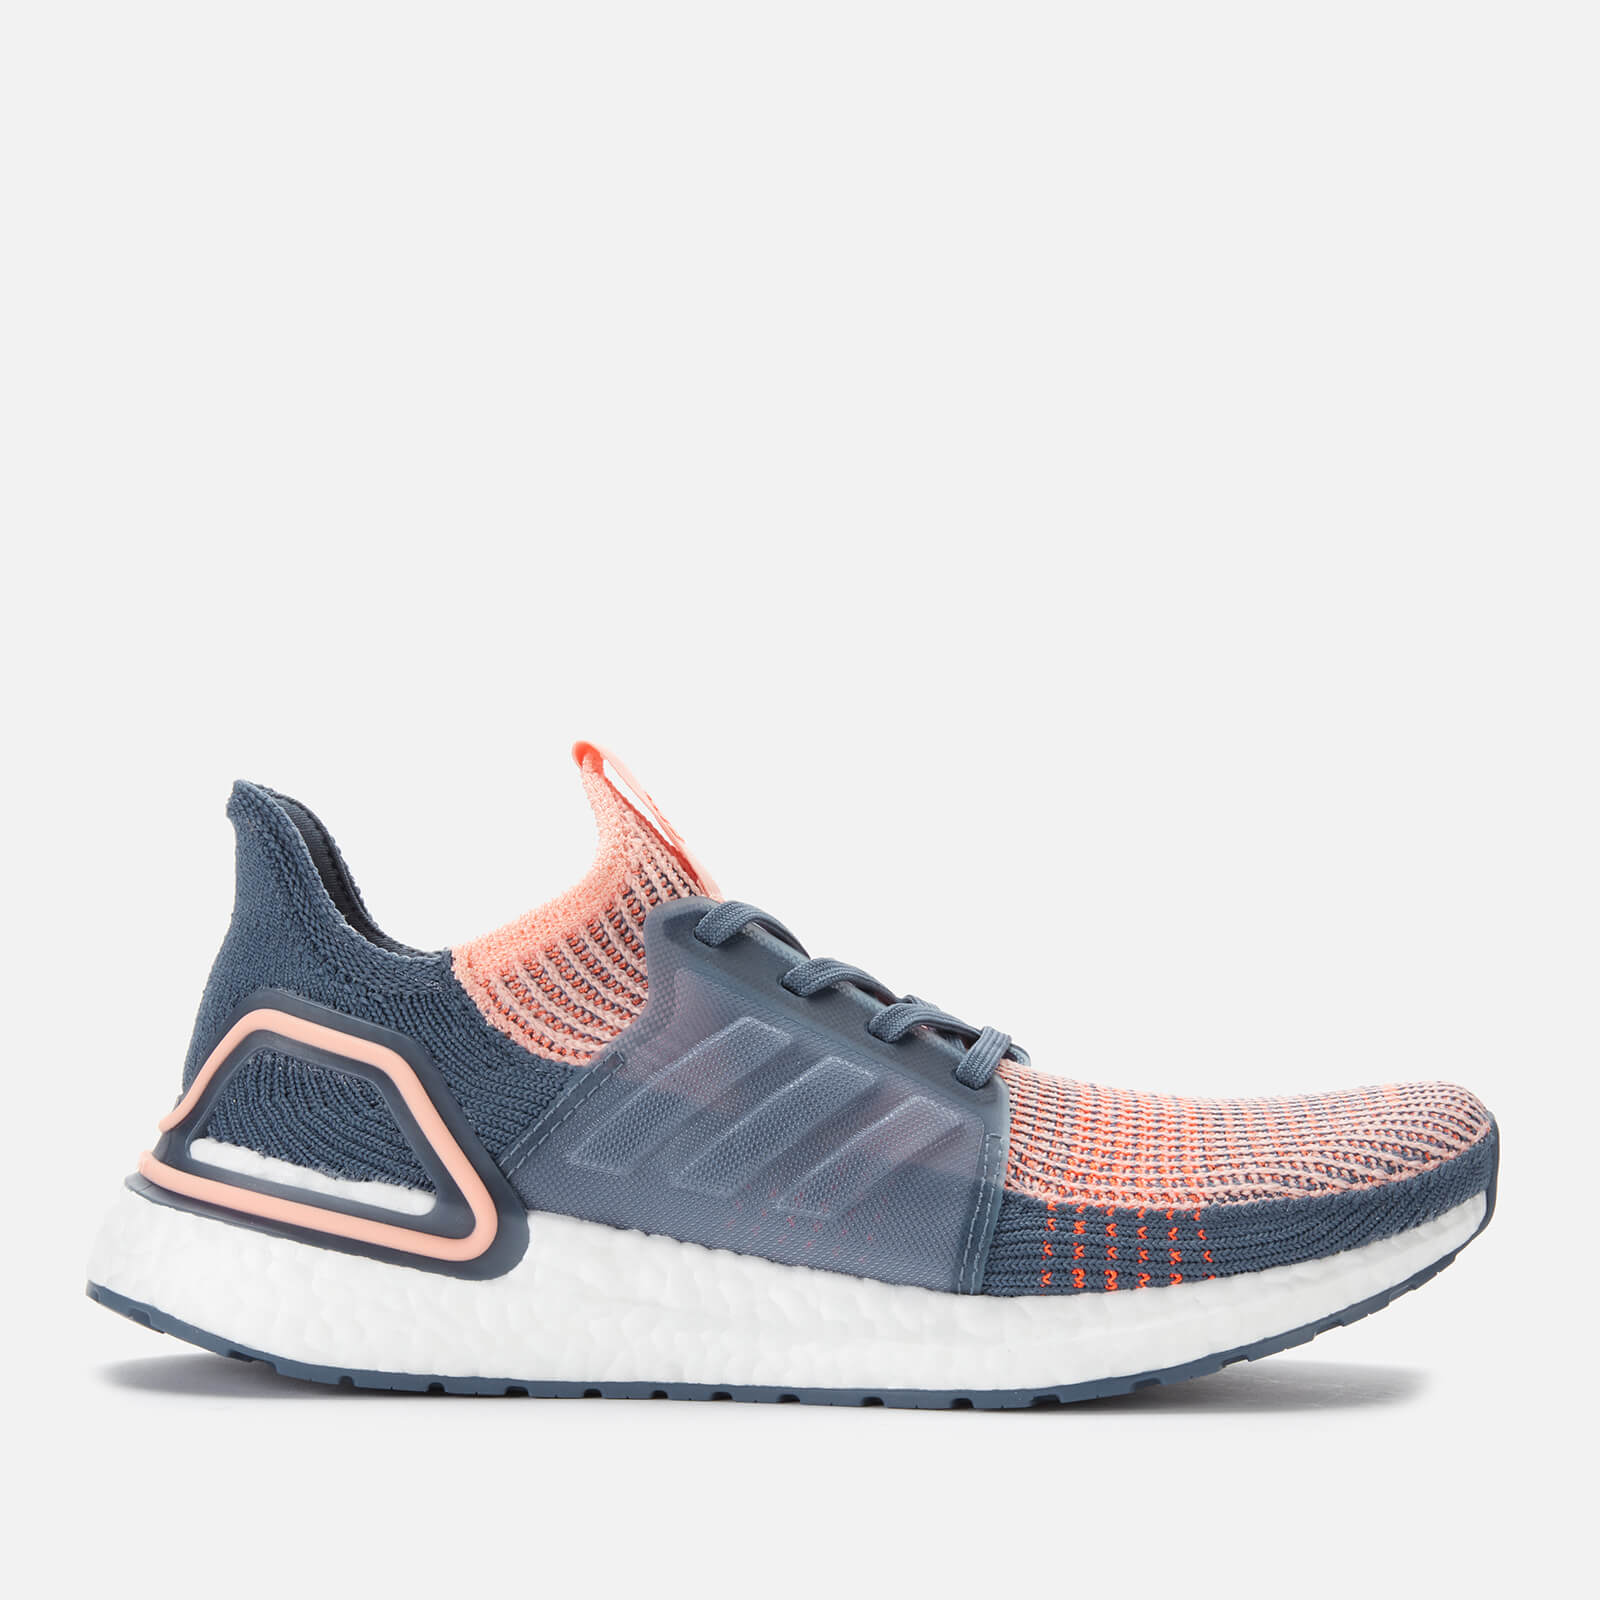 Ultraboost 19 Trainers - Pink/Blue 